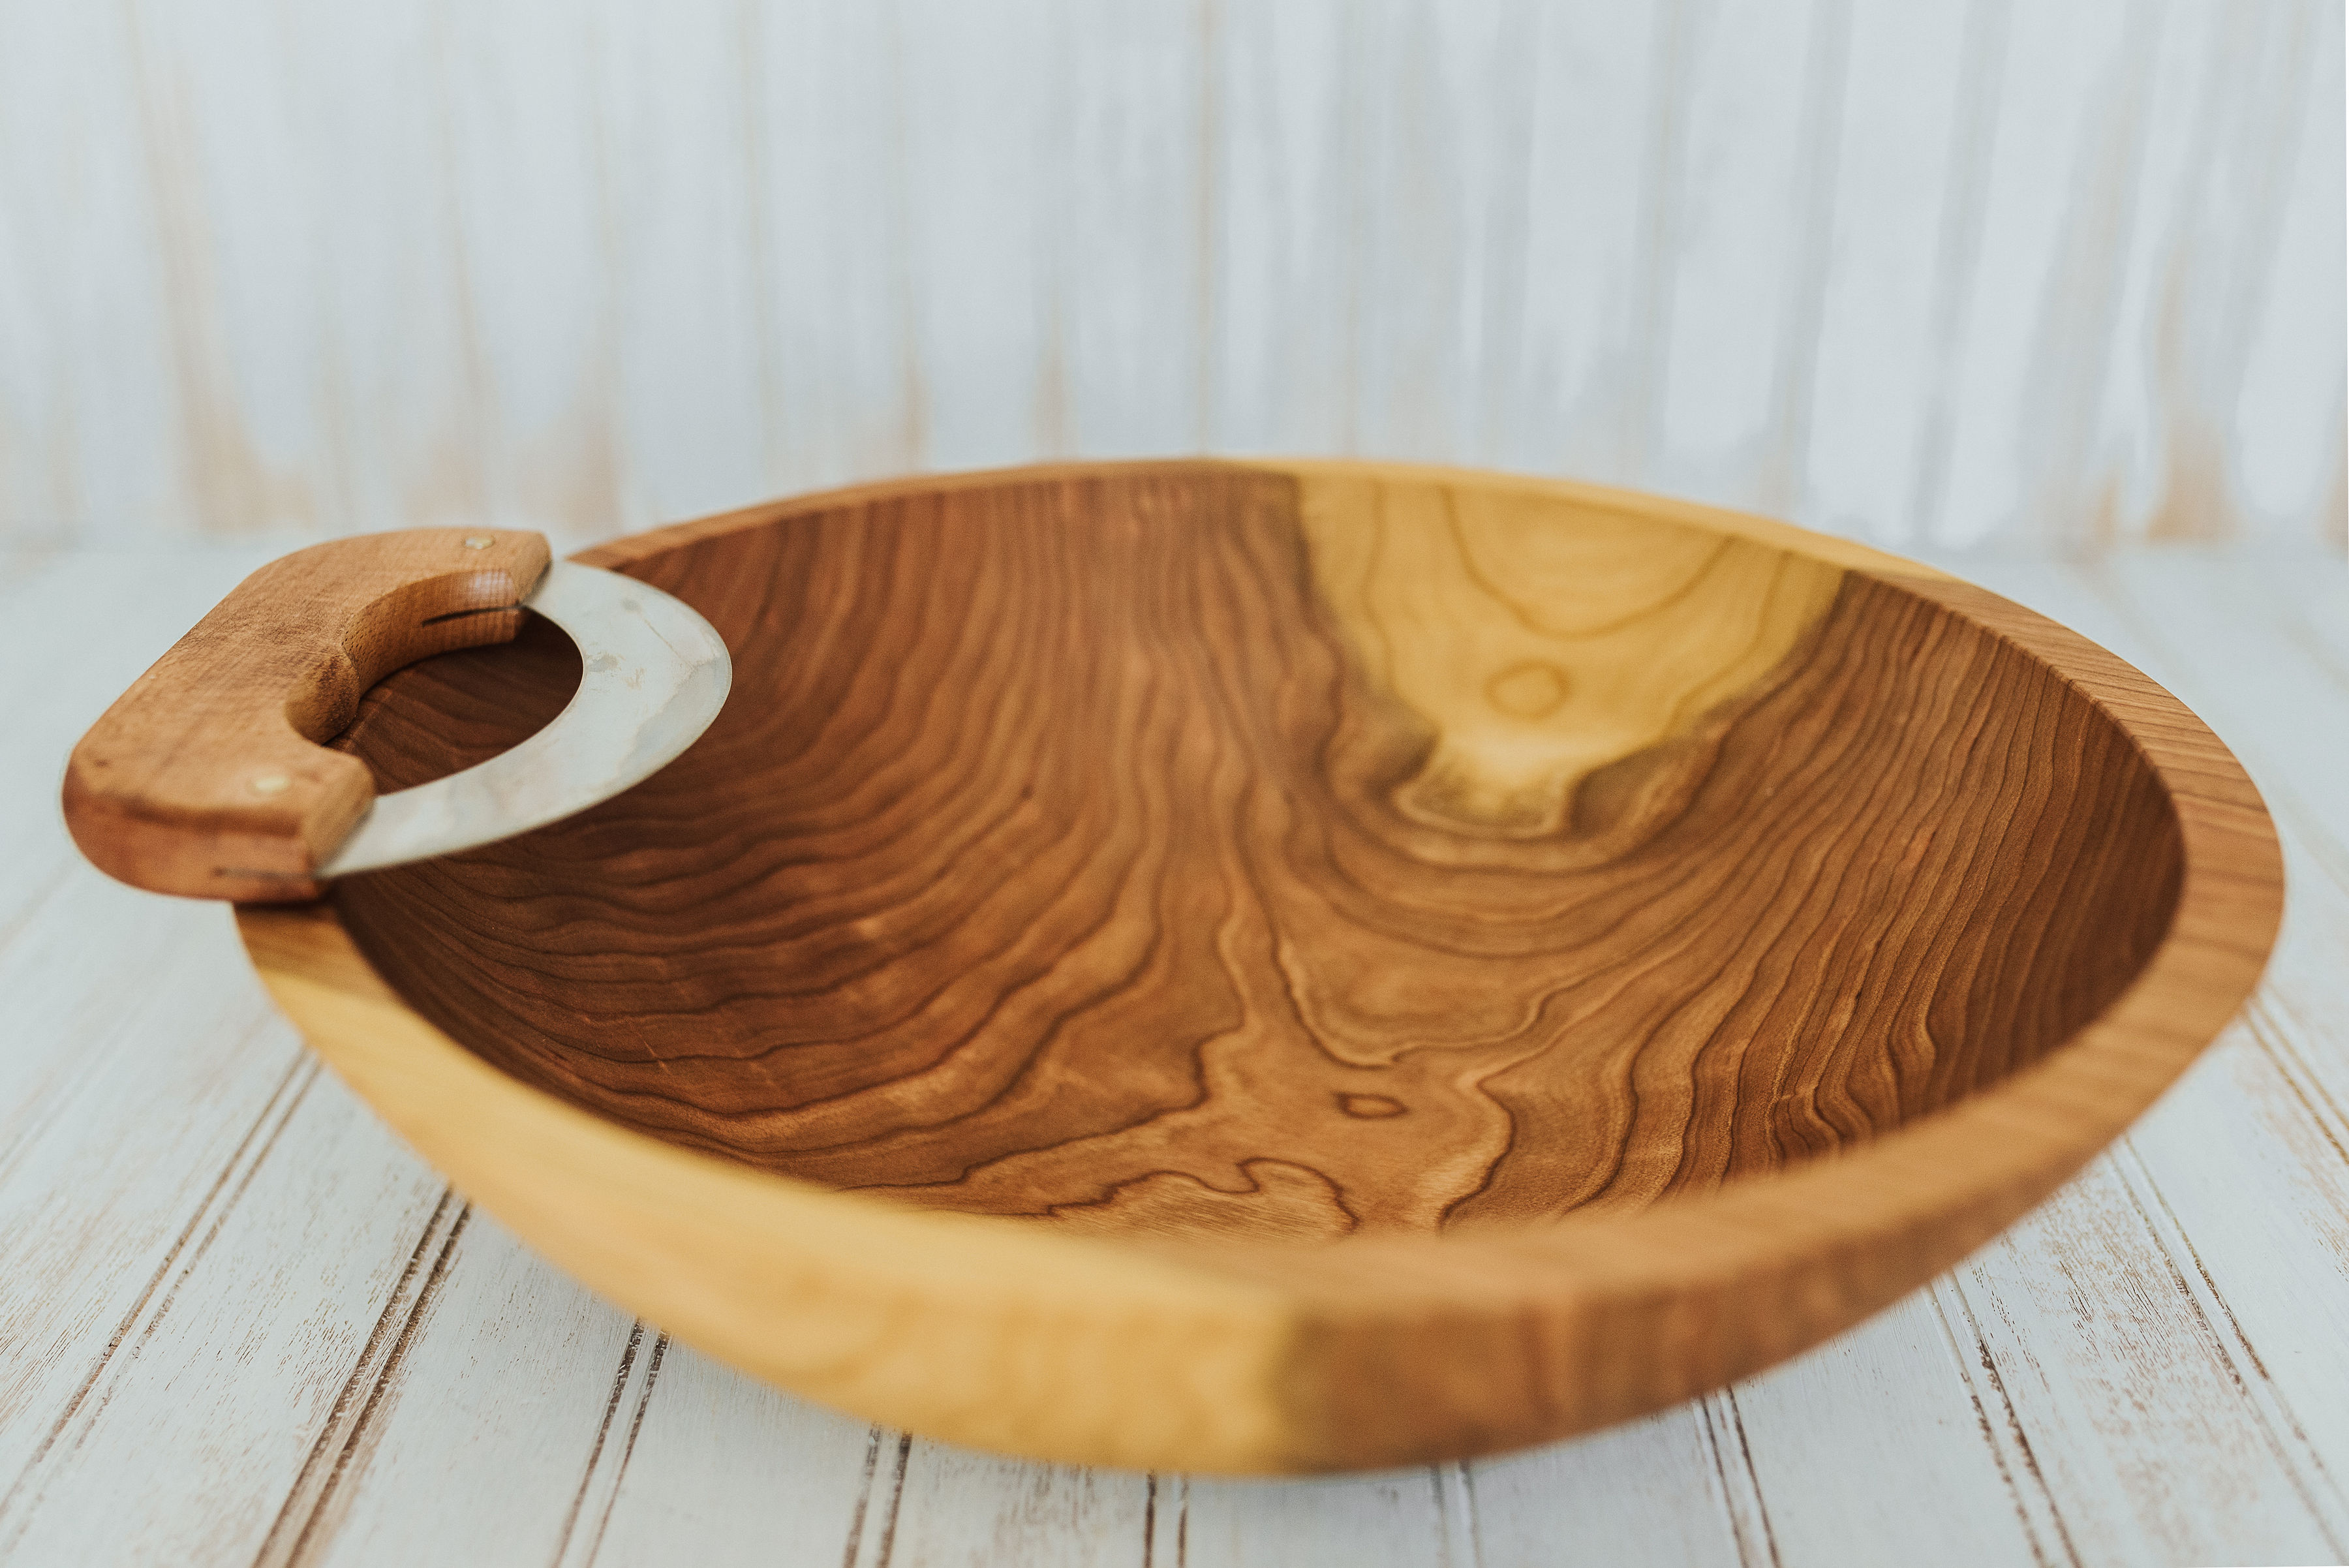 Handcrafted Chopping Bowl with Mezzaluna